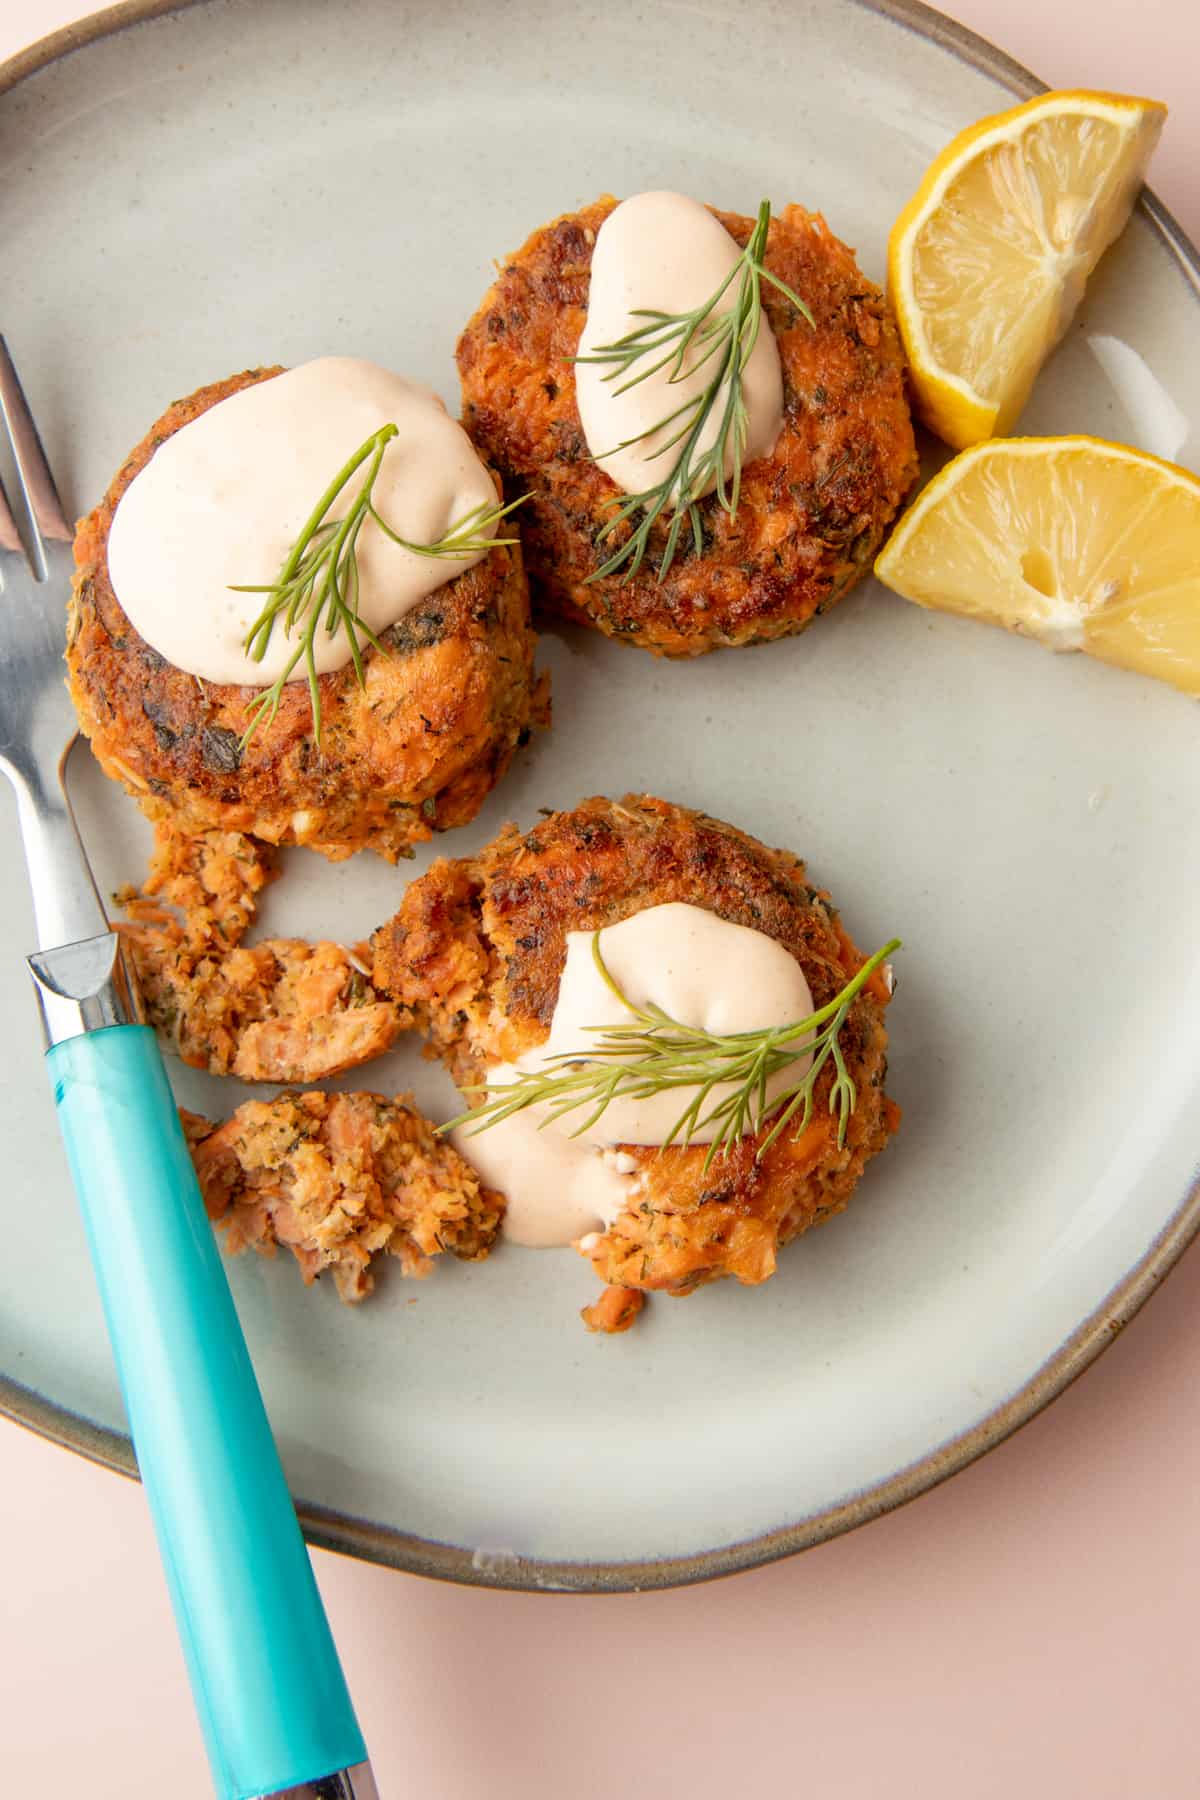 Three salmon patties dolloped with remoulade sauce and garnished with dill sit on a plate with a fork and two lemon slices.